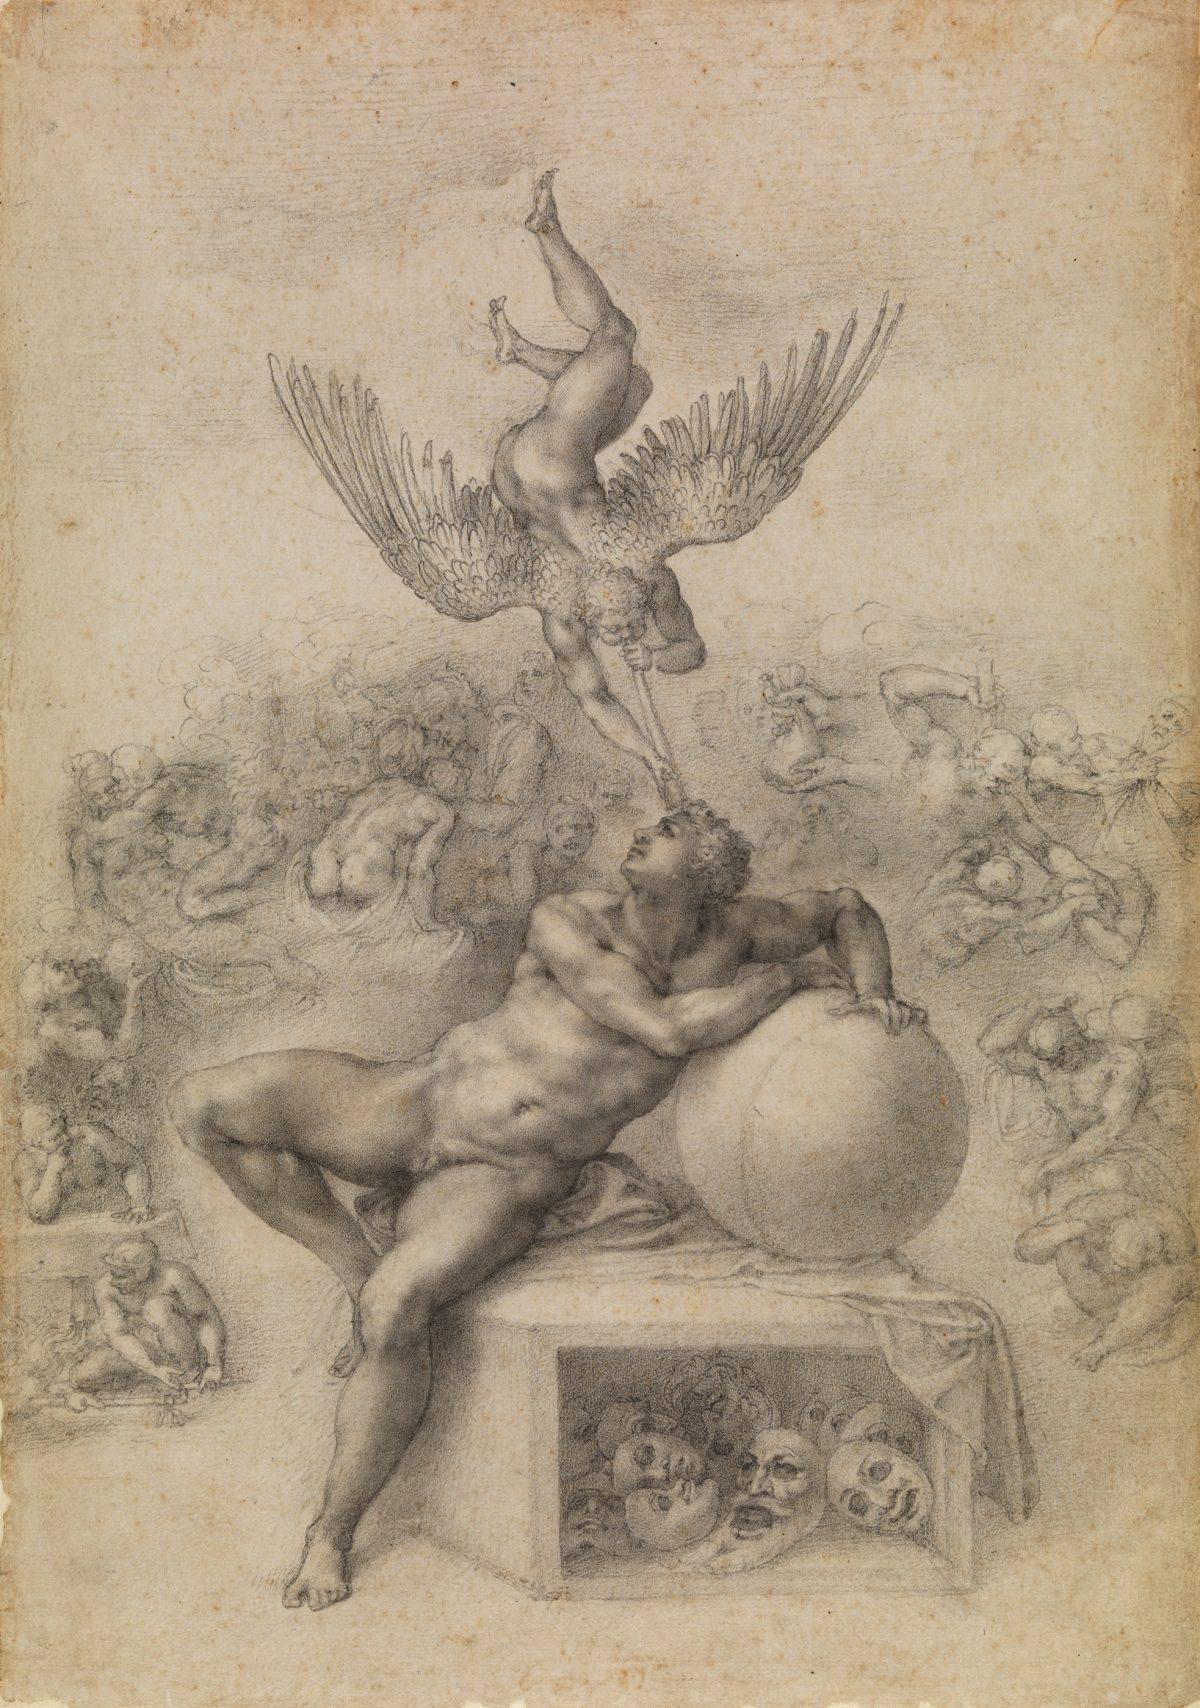 “Il Sogno (The Dream),” circa 1530s, by Michelangelo Buonarroti (Italian, Caprese 1475–1564 Rome). Drawing, black chalk, sheet. 15 5/16 inches by 10 15/16 inches. (London, Courtauld Gallery, Prince Gate bequest)